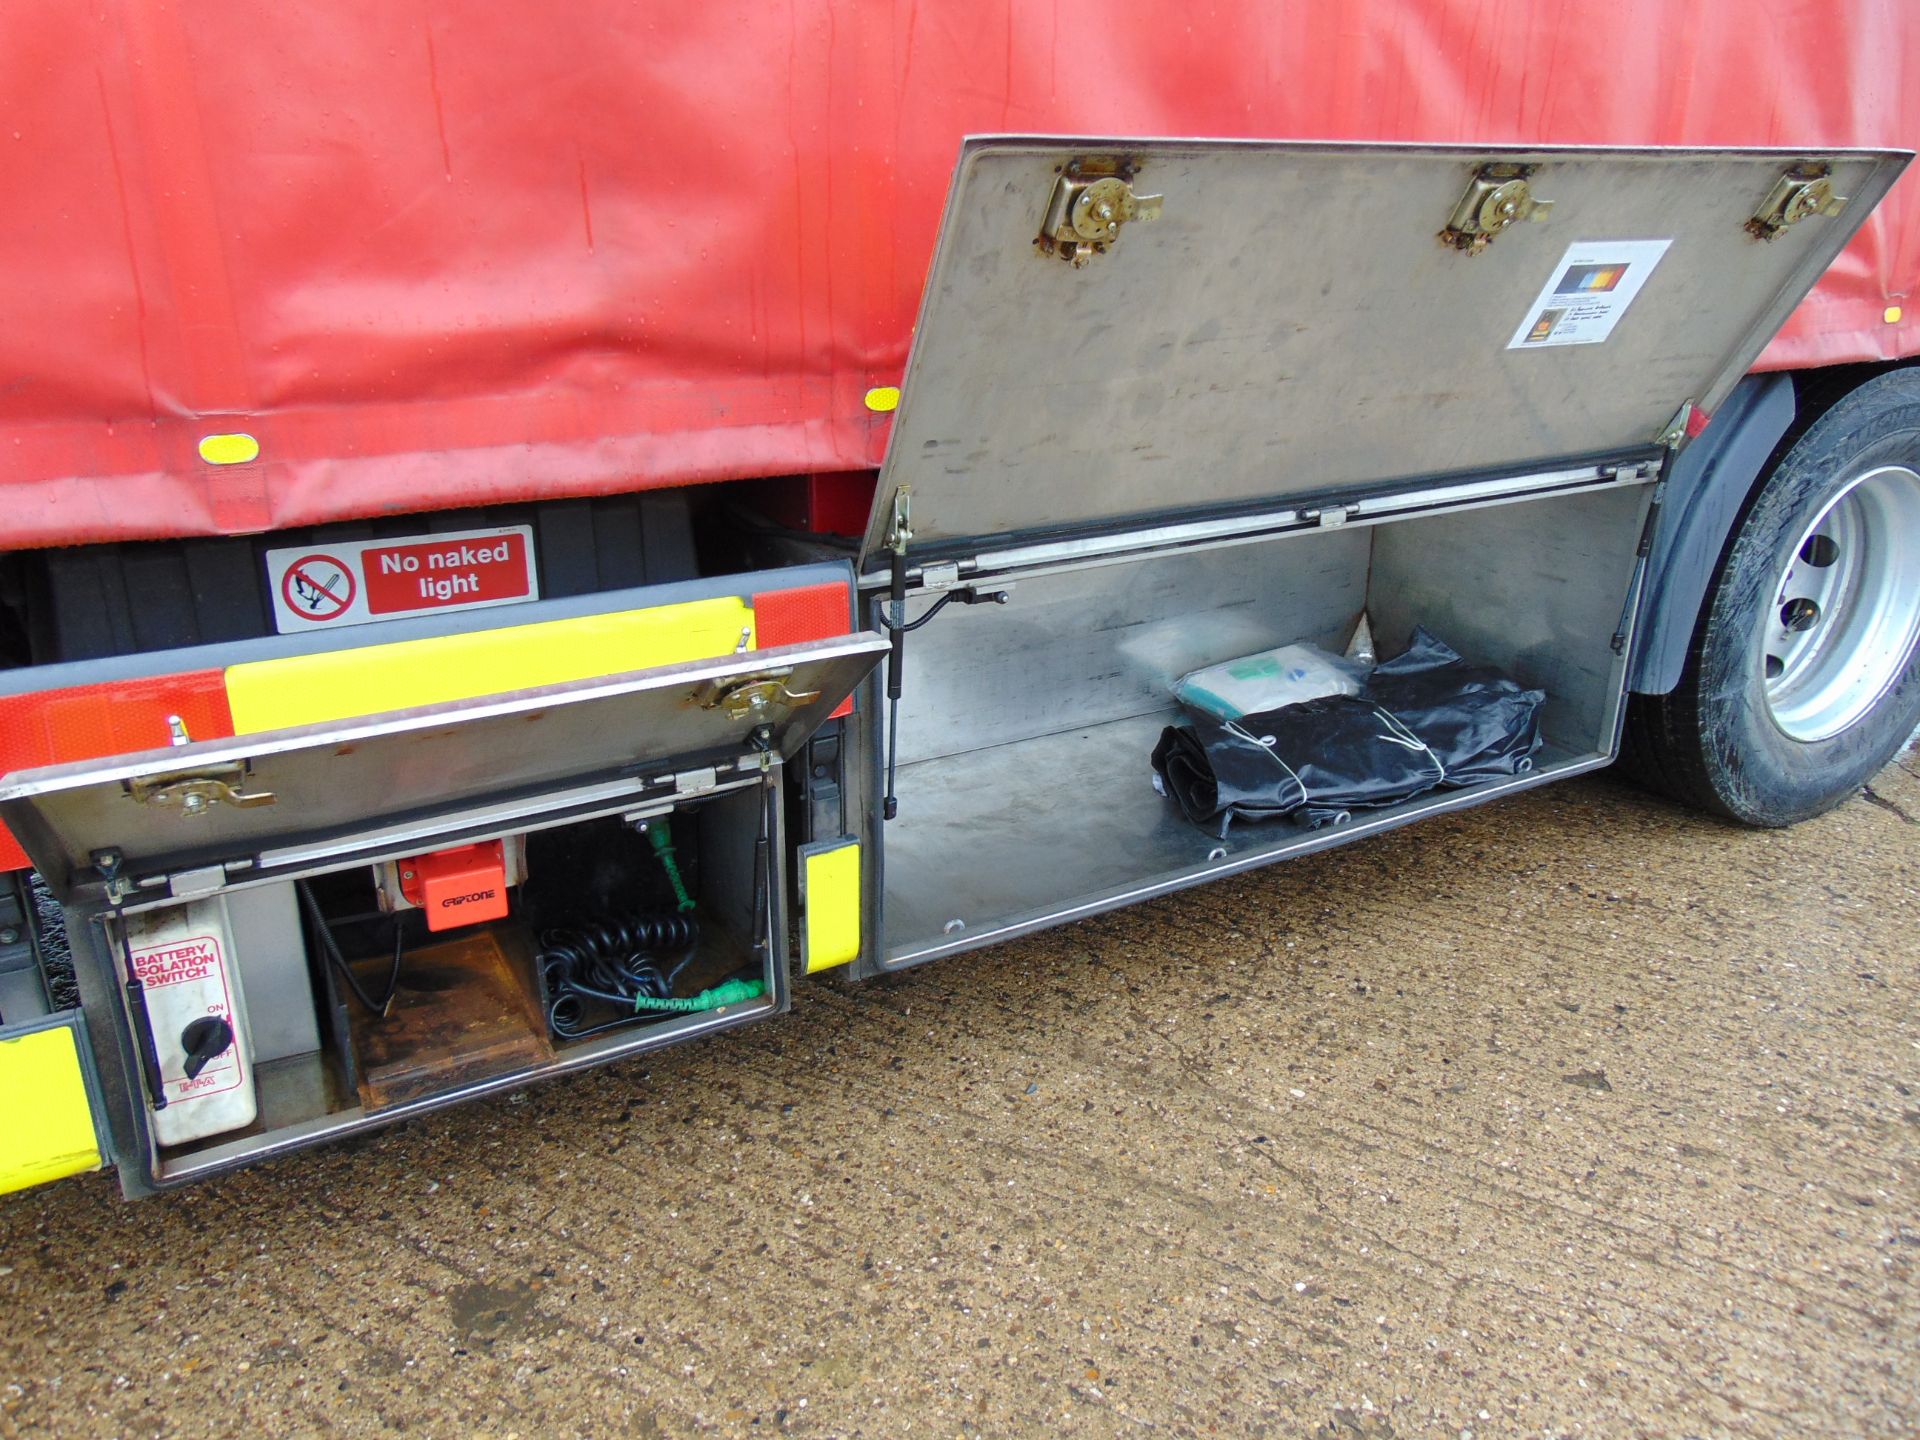 2004 MAN TG-A 6x2 Rear Steer Incident Support Unit - Image 16 of 27